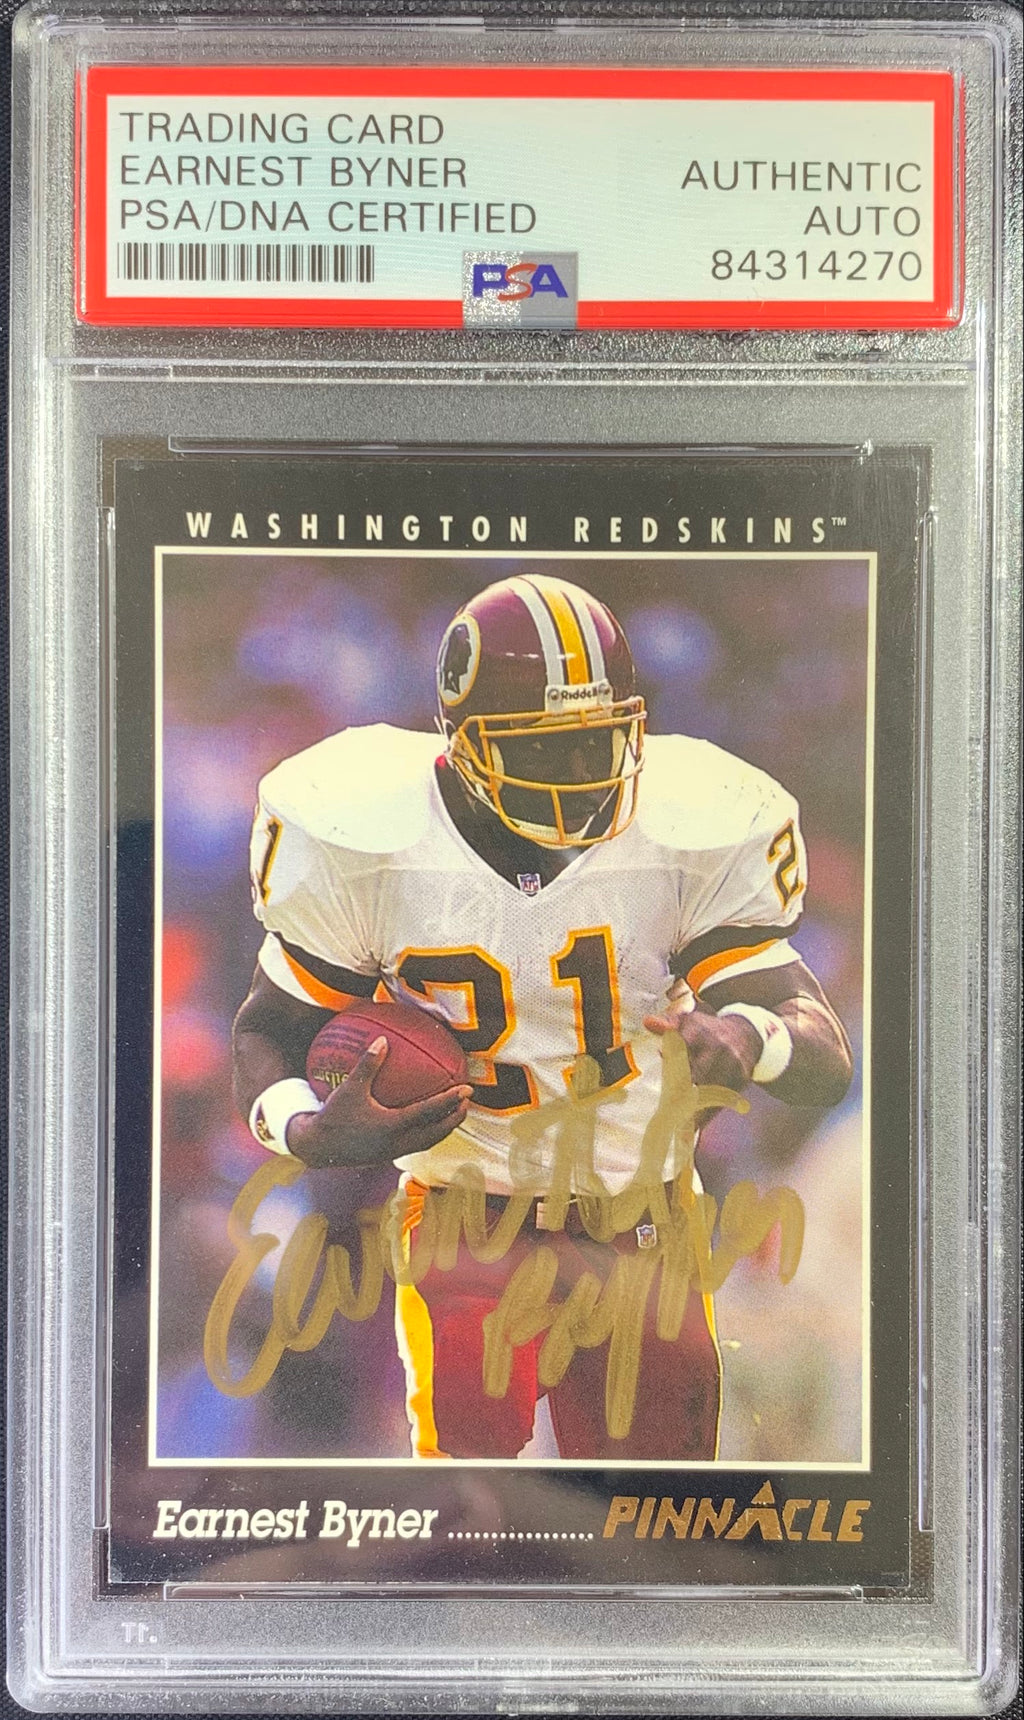 Earnest Byner auto signed 1993 Pinnacle card #328 Redskins PSA Encapsulated